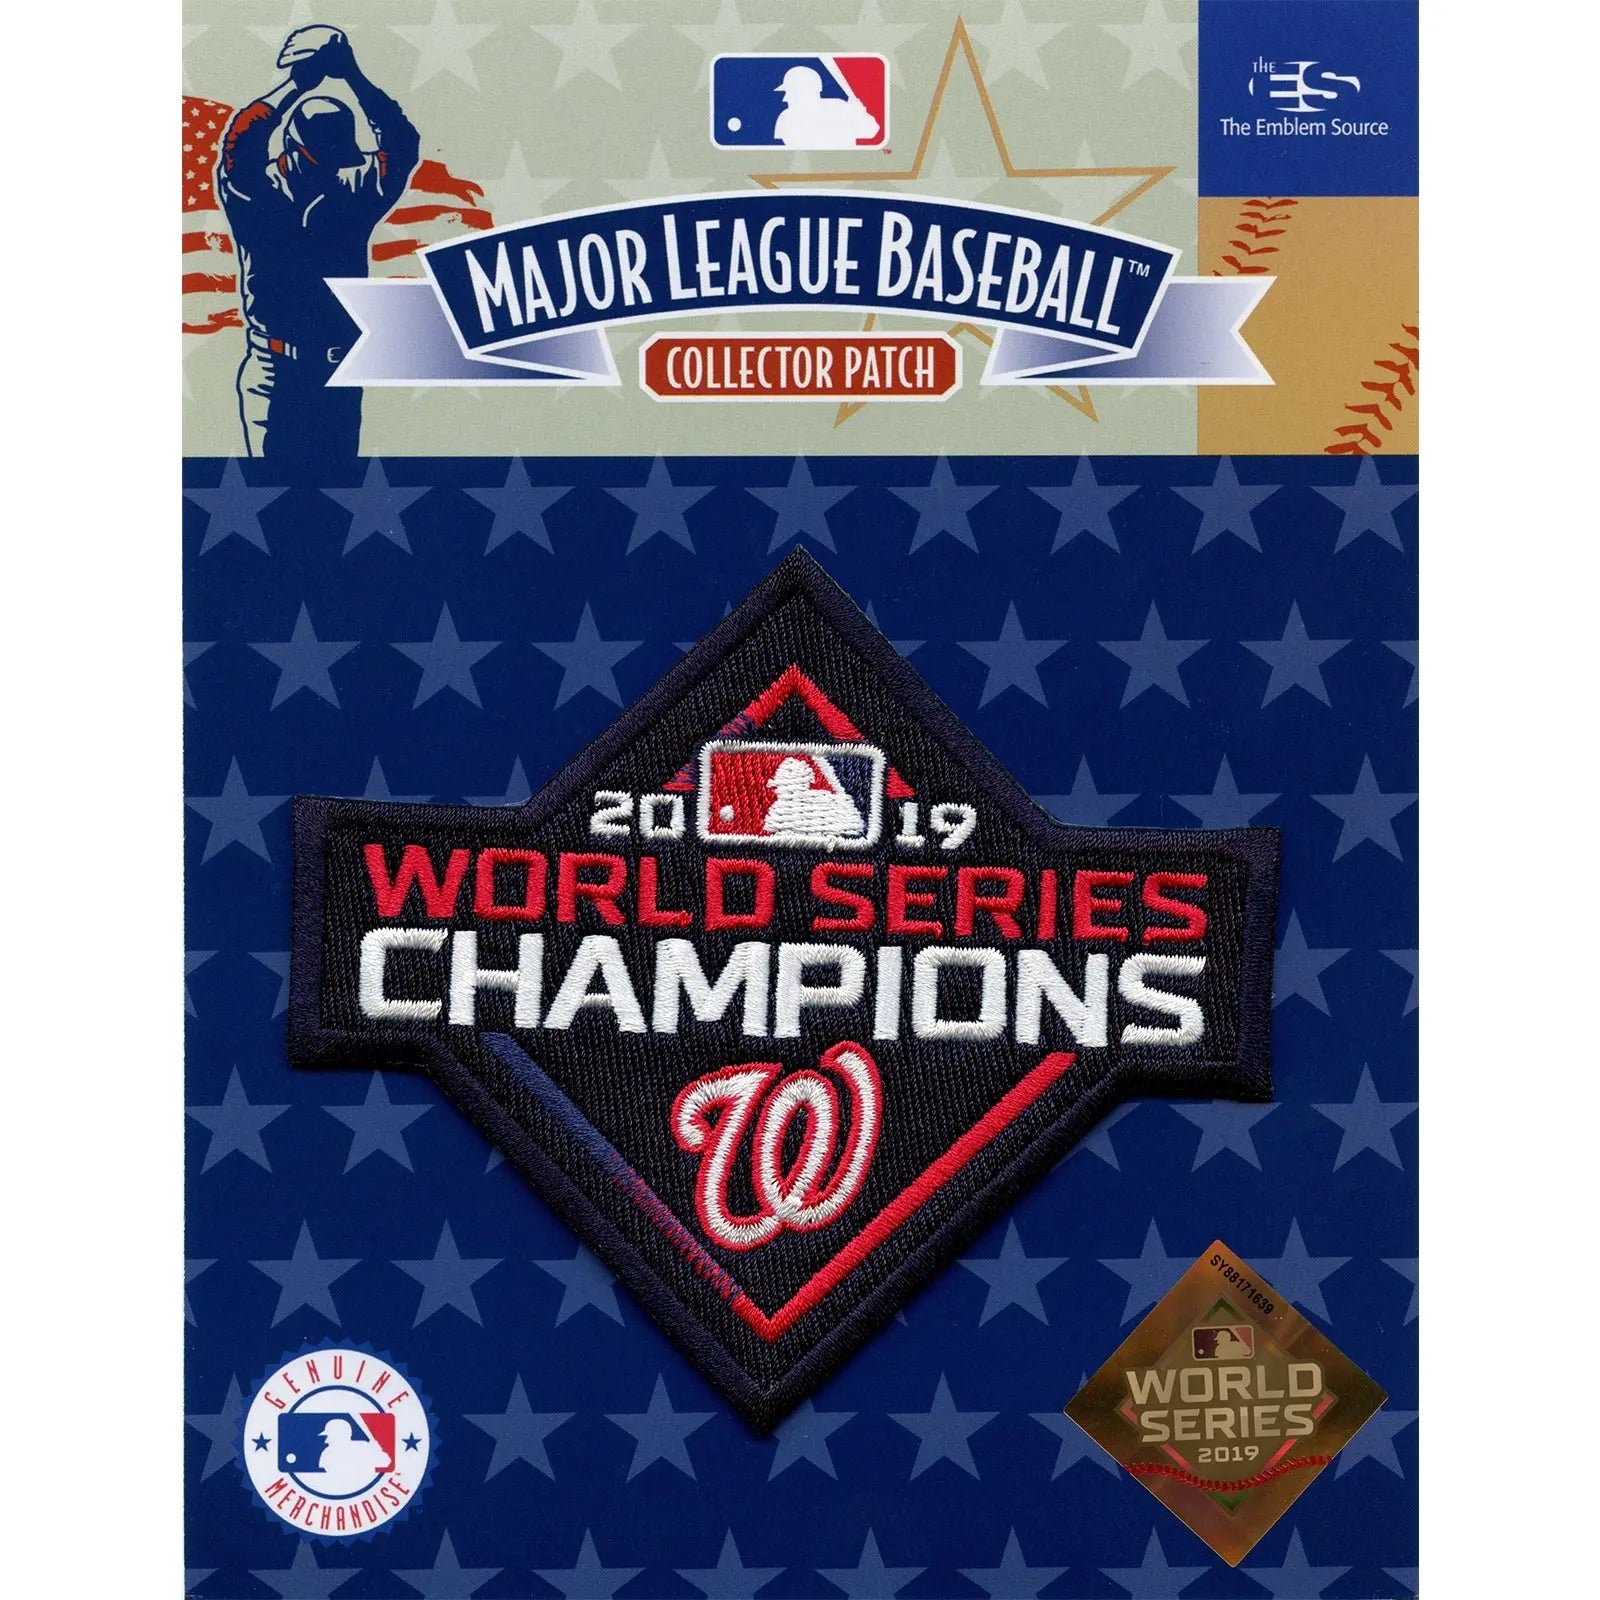 MLB Network - The Washington Nationals are your 2019 World Series champions!